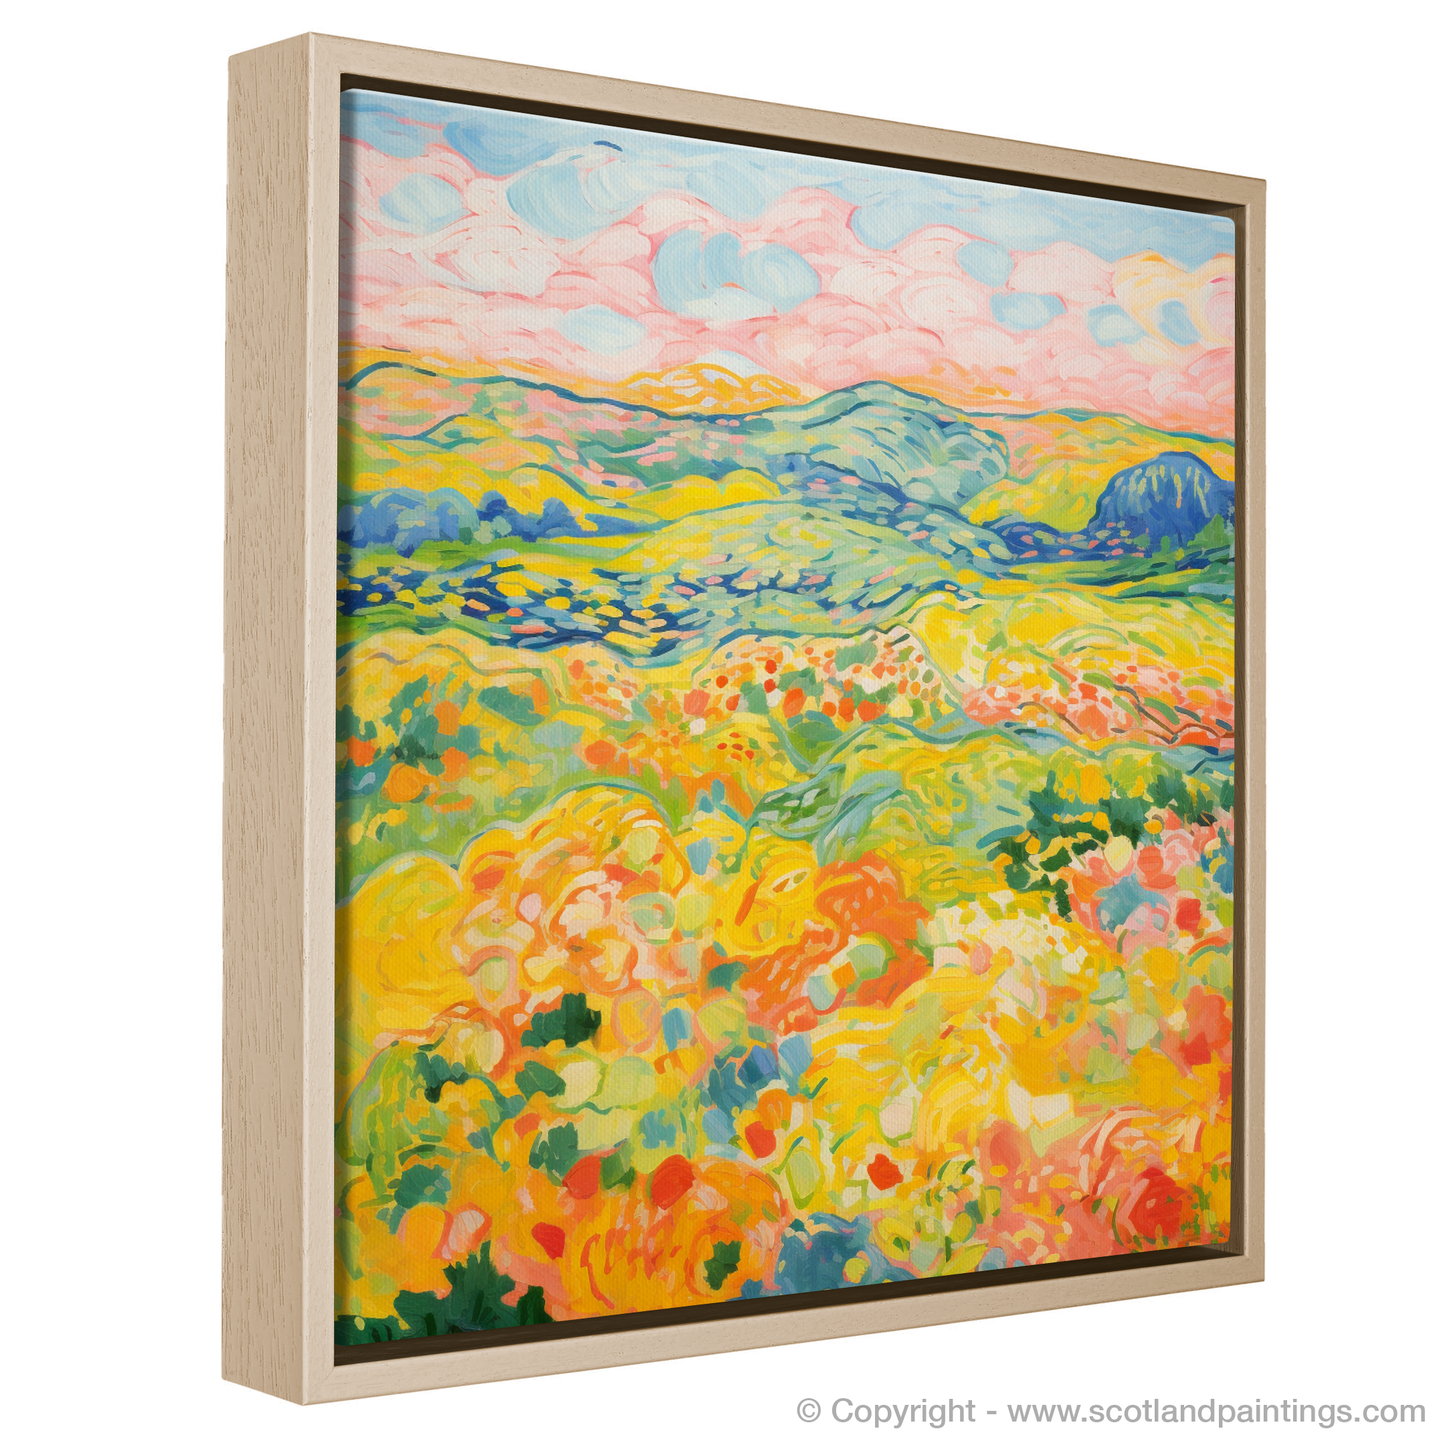 Painting and Art Print of Glenesk, Angus in summer entitled "Summer Symphony in Glenesk".